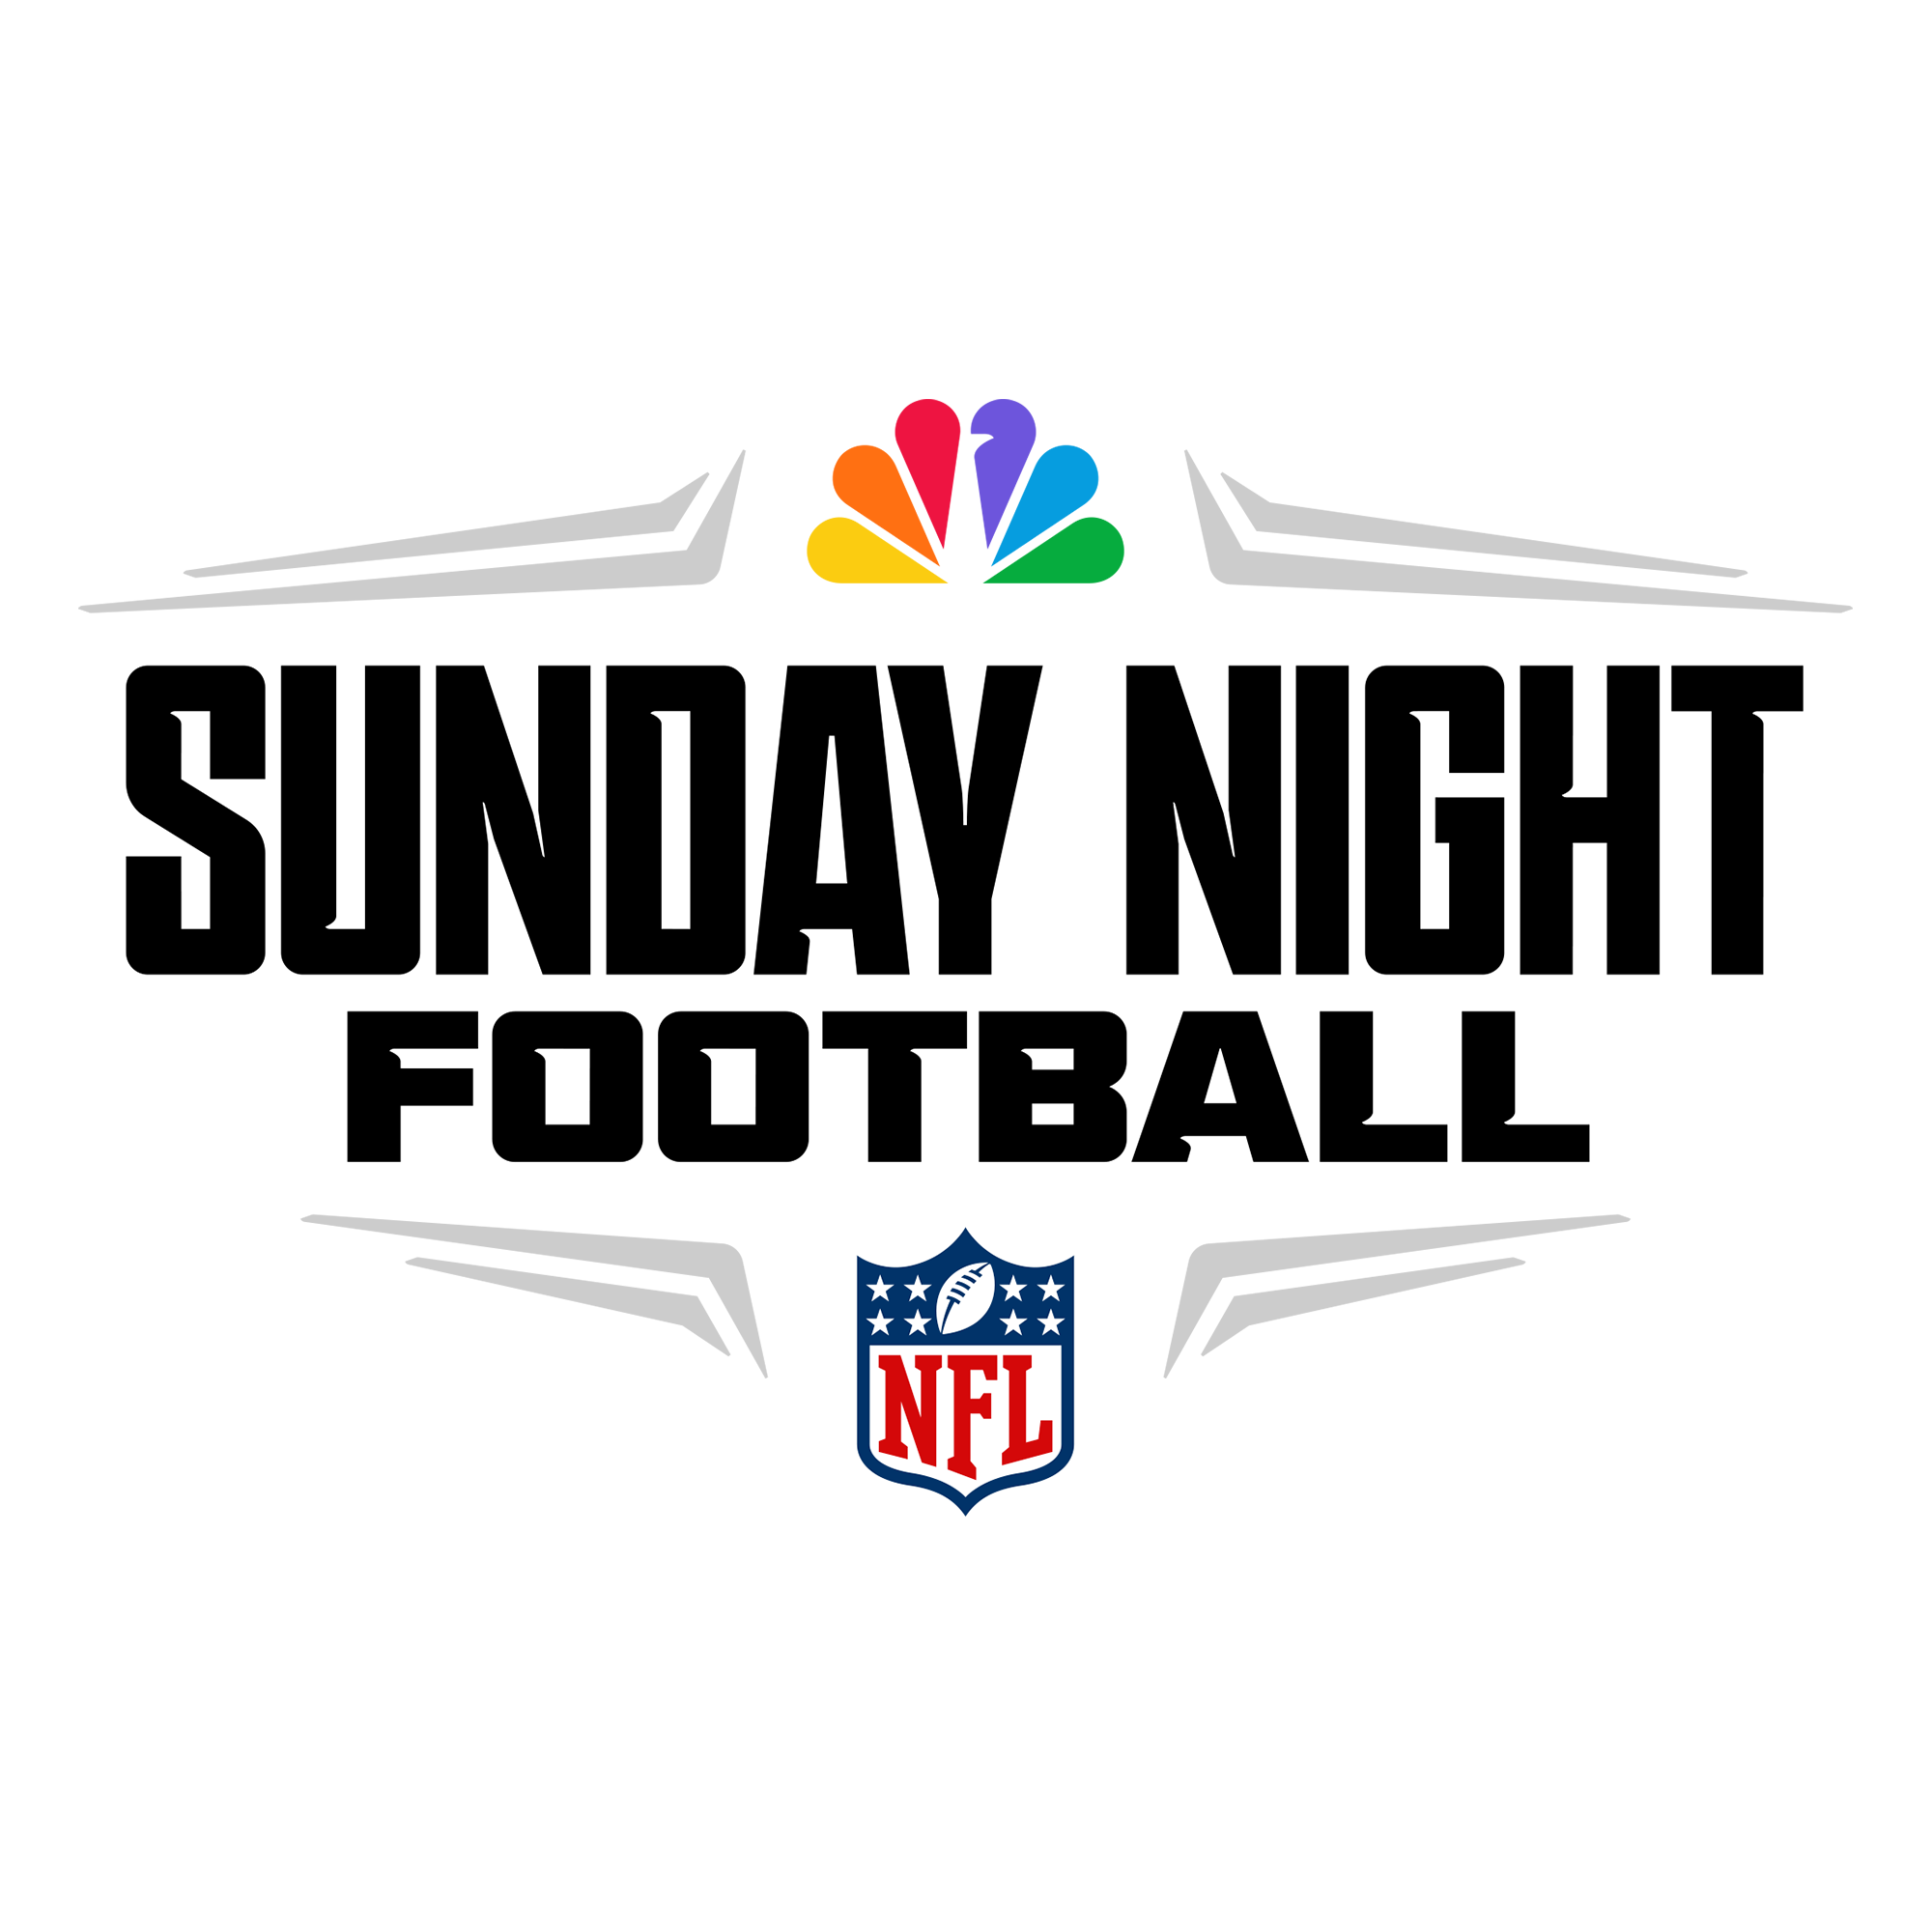 televised nfl games this sunday